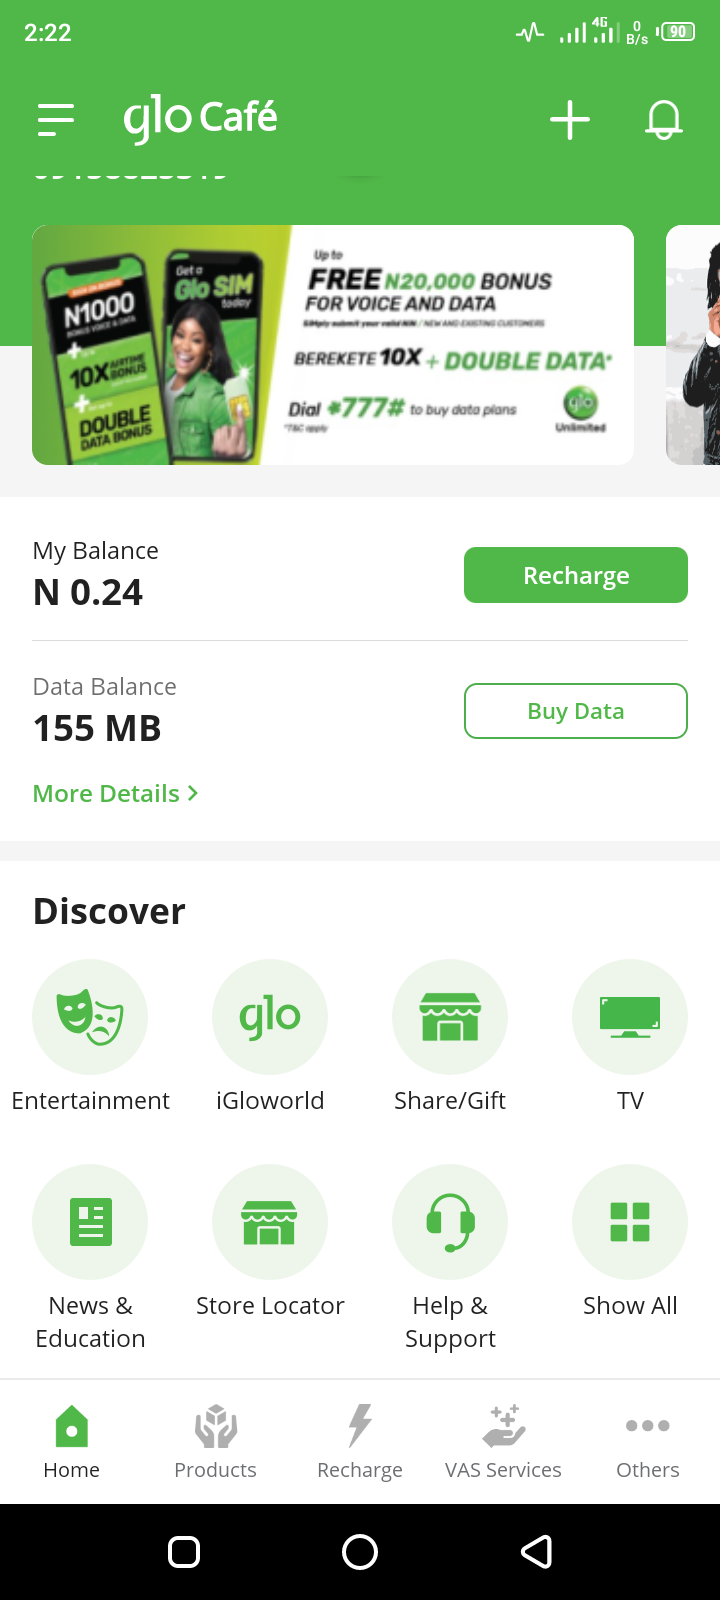 How to check Airtime balance on Glo App